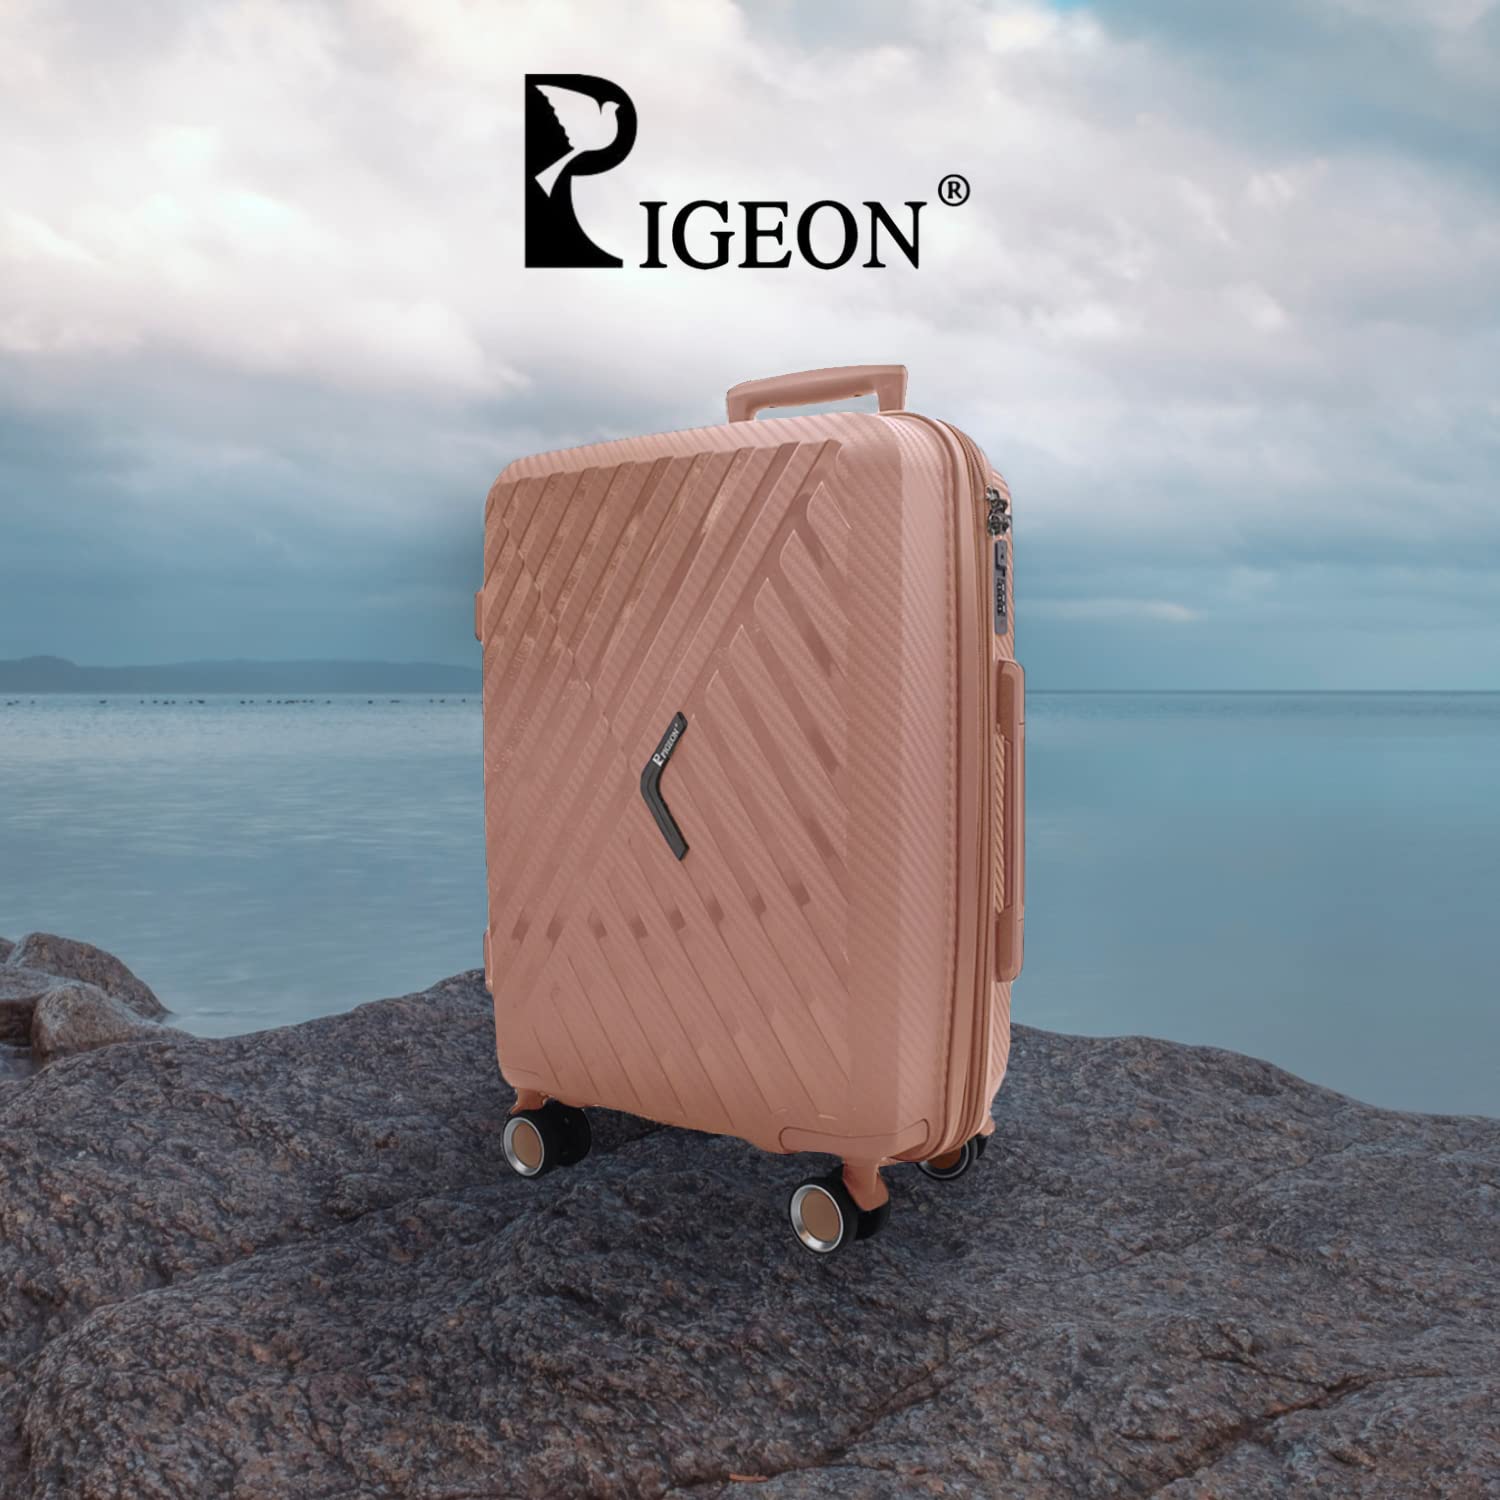 PIGEON New Luggage Set With Double Secure Zipper - Lightweight 9 Colors 3-Piece PP Luggage Sets, water resistant with 3 digit number Lock